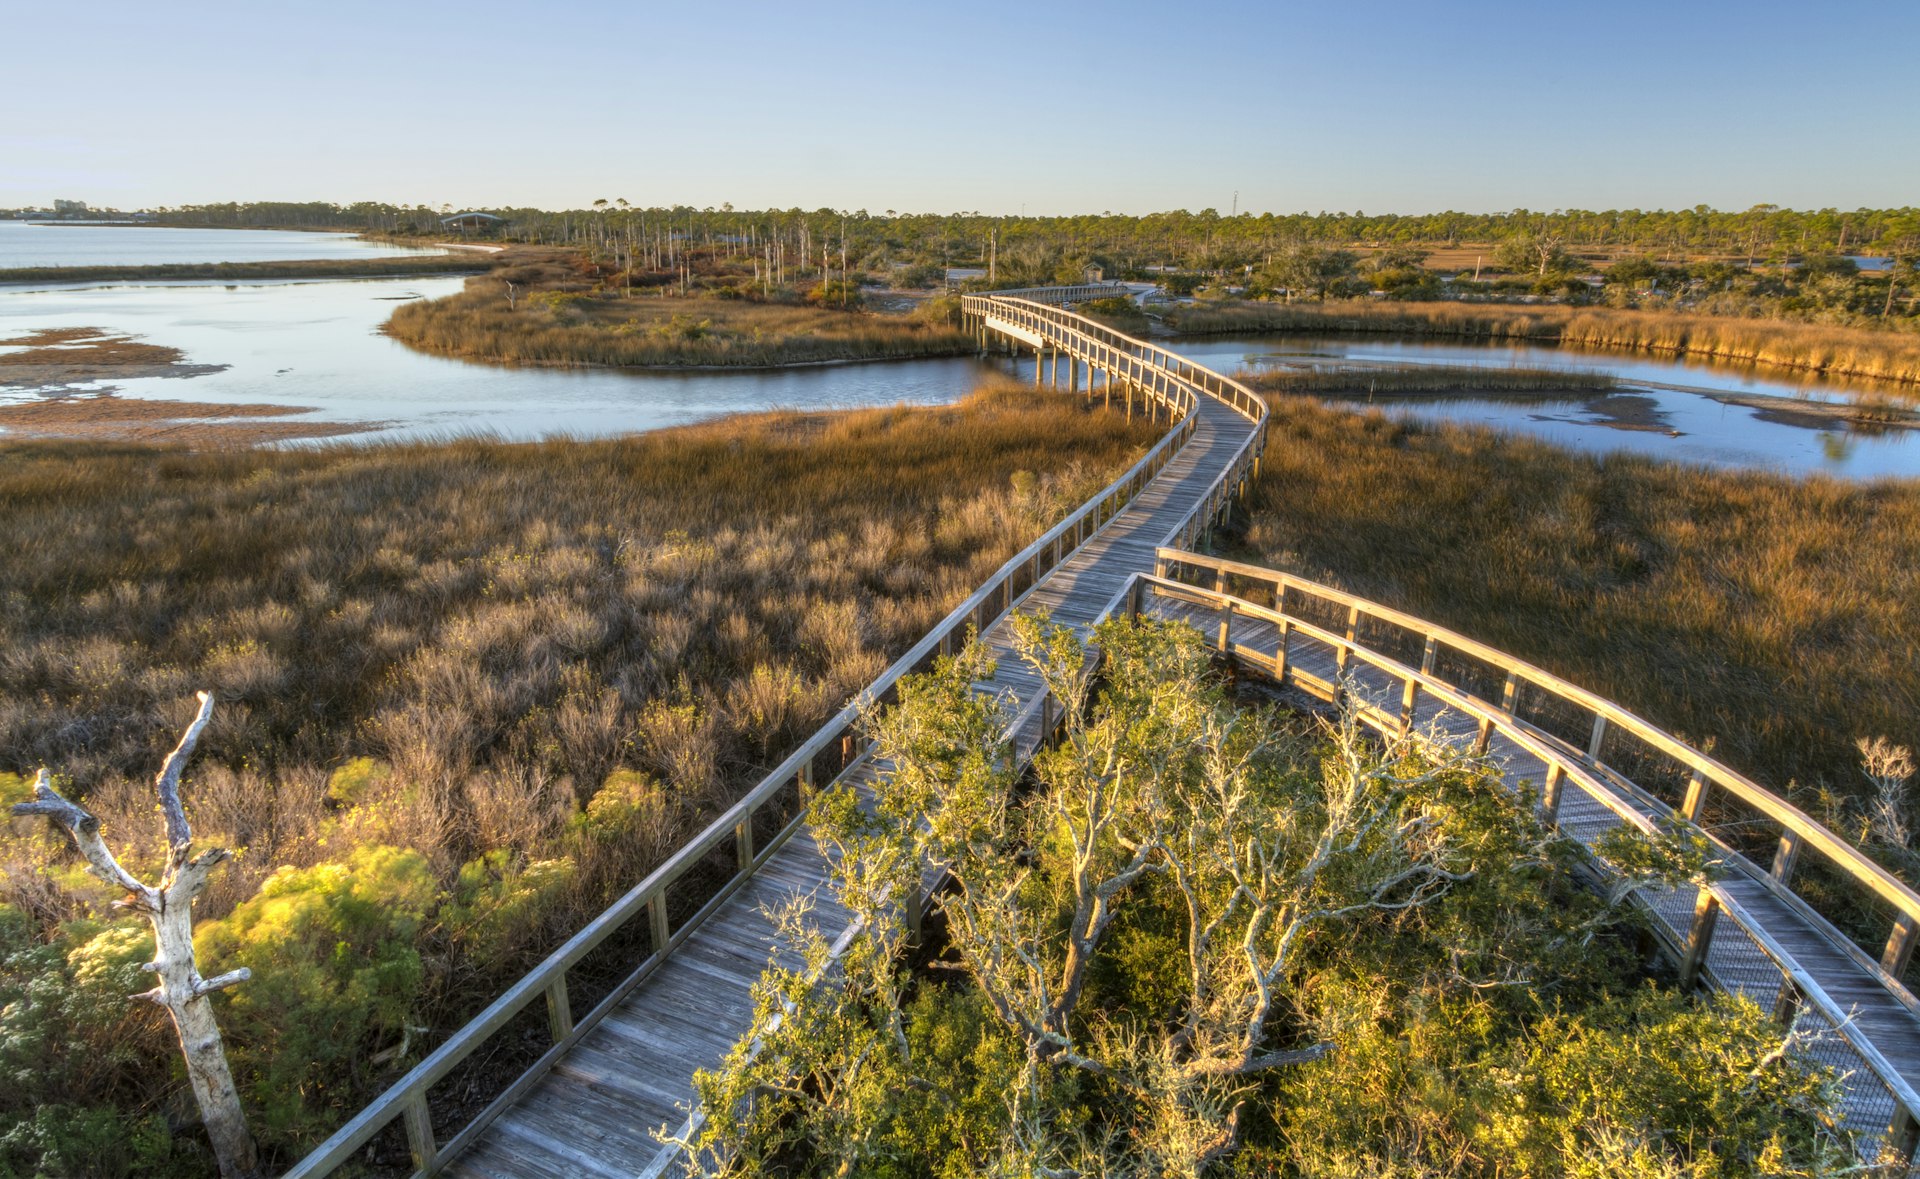 Boardwalk trails cross a tidal outlet to Grand Lagoon in Big Lagoon State Park